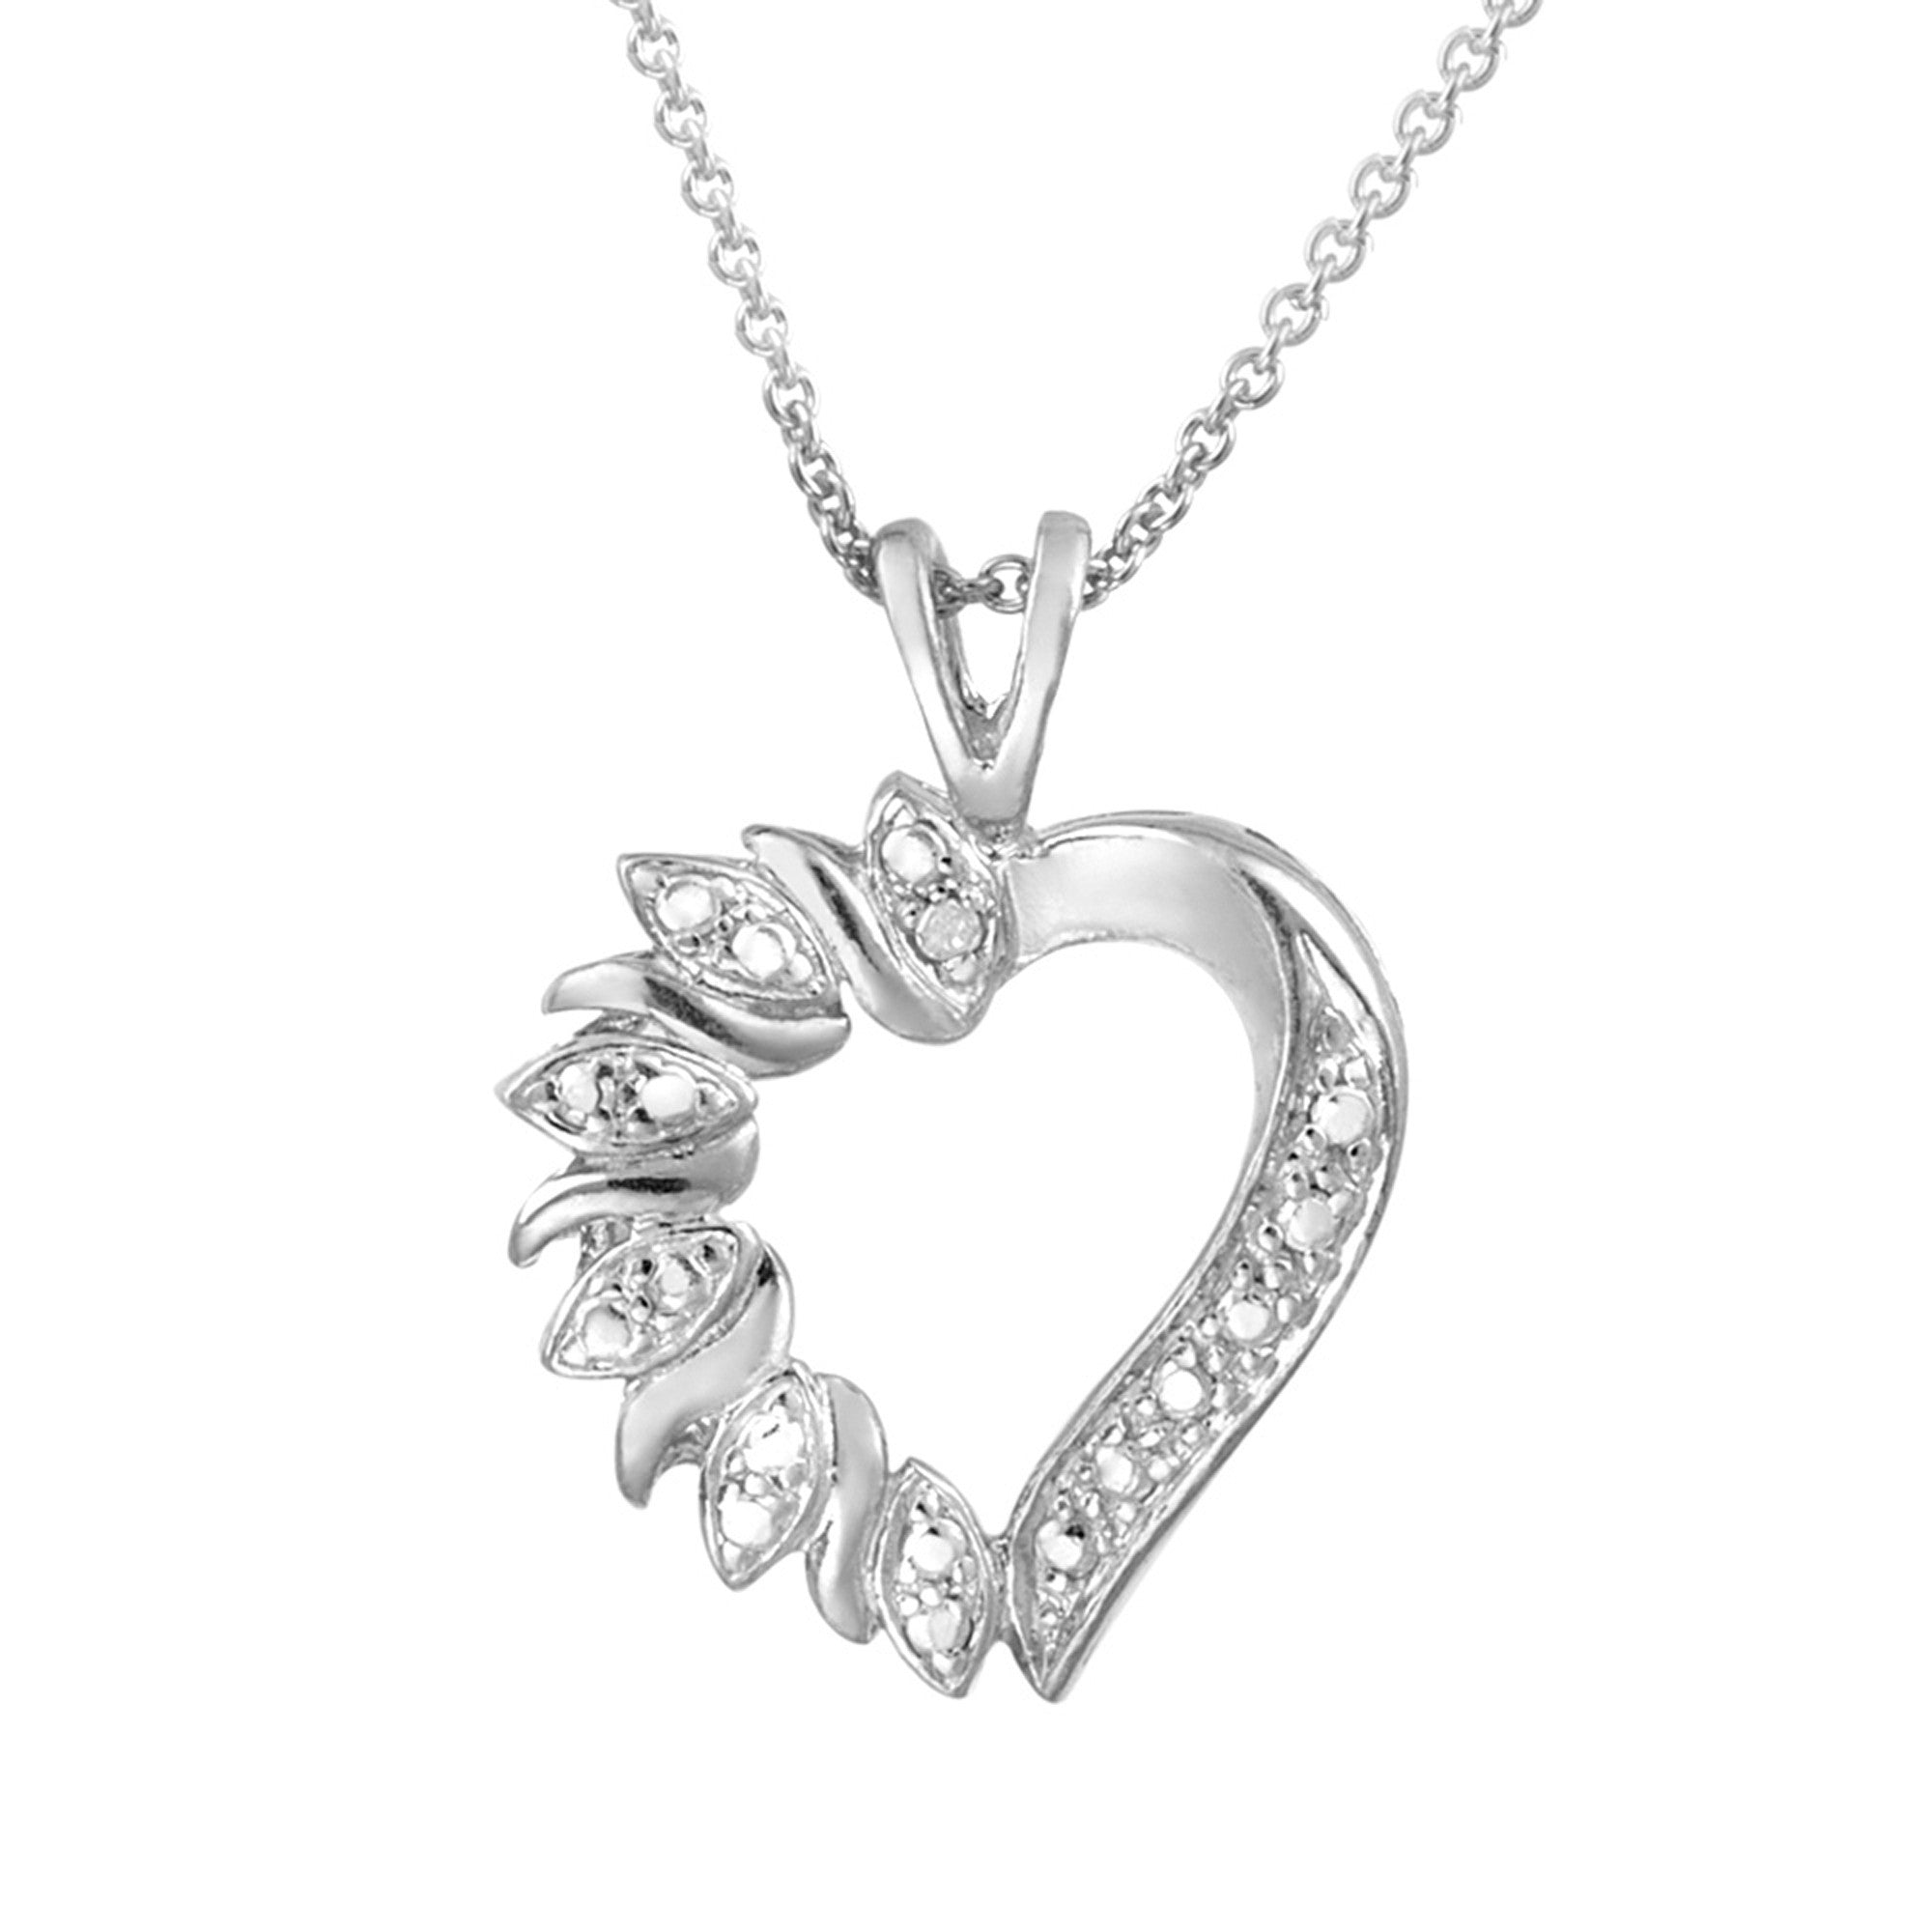 Heart Necklace With Diamond Accents - Sterling Silver